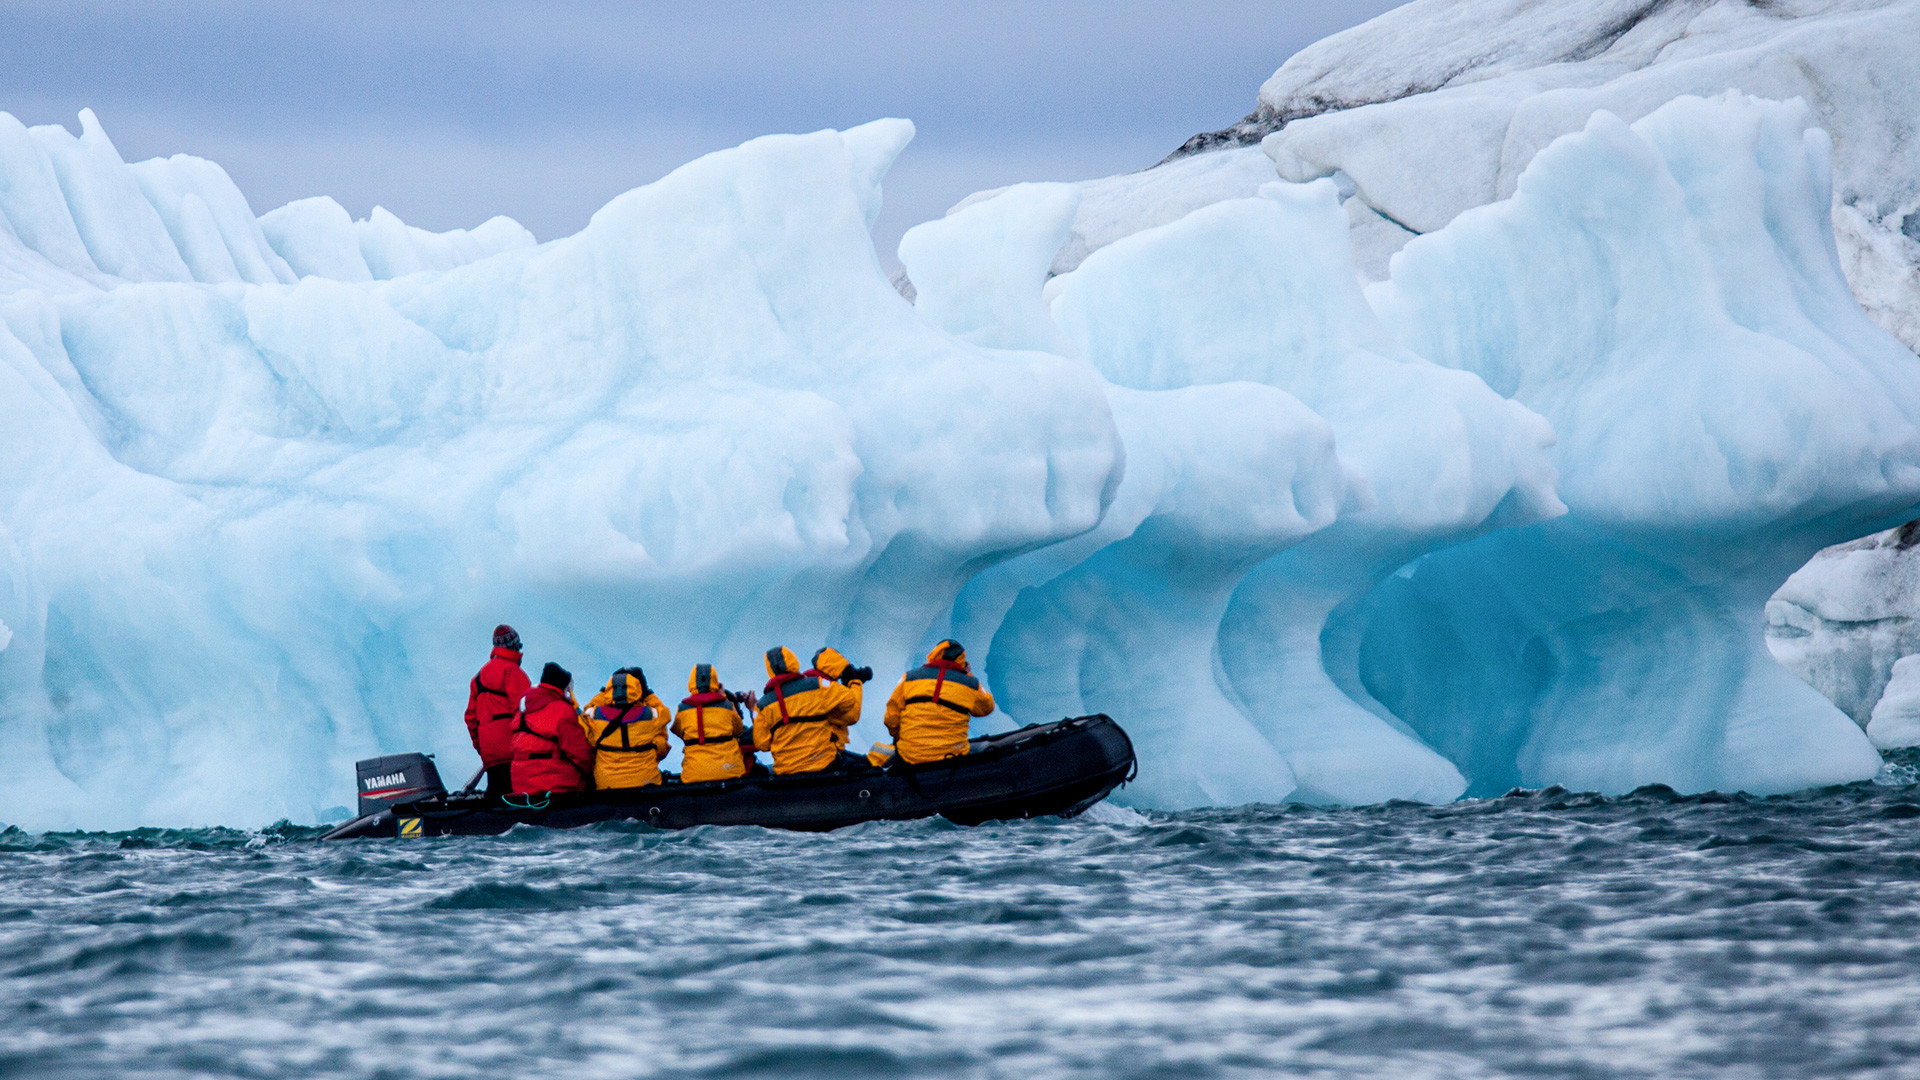 'Zodiak' with tourists in front of an iceberg in the Arctic Ocean. Russian Arctic.